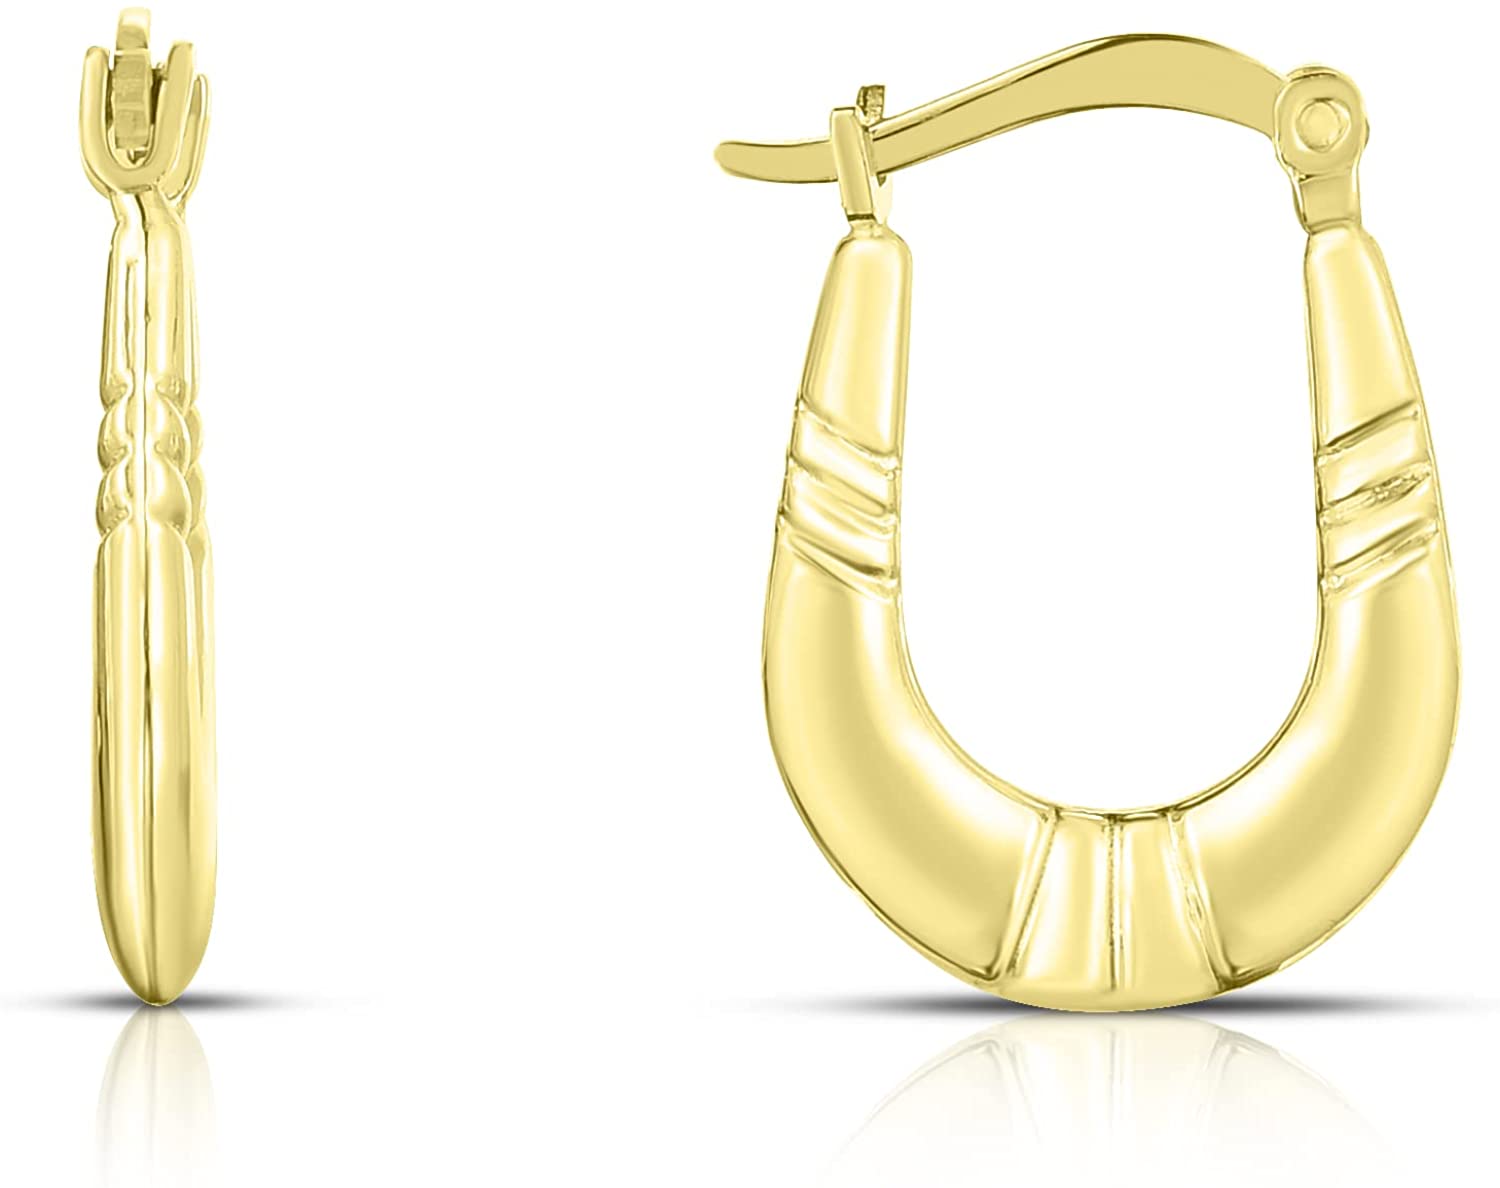 10k Yellow Gold Oval Shape with Triple Ribbed Design Hoop Earrings